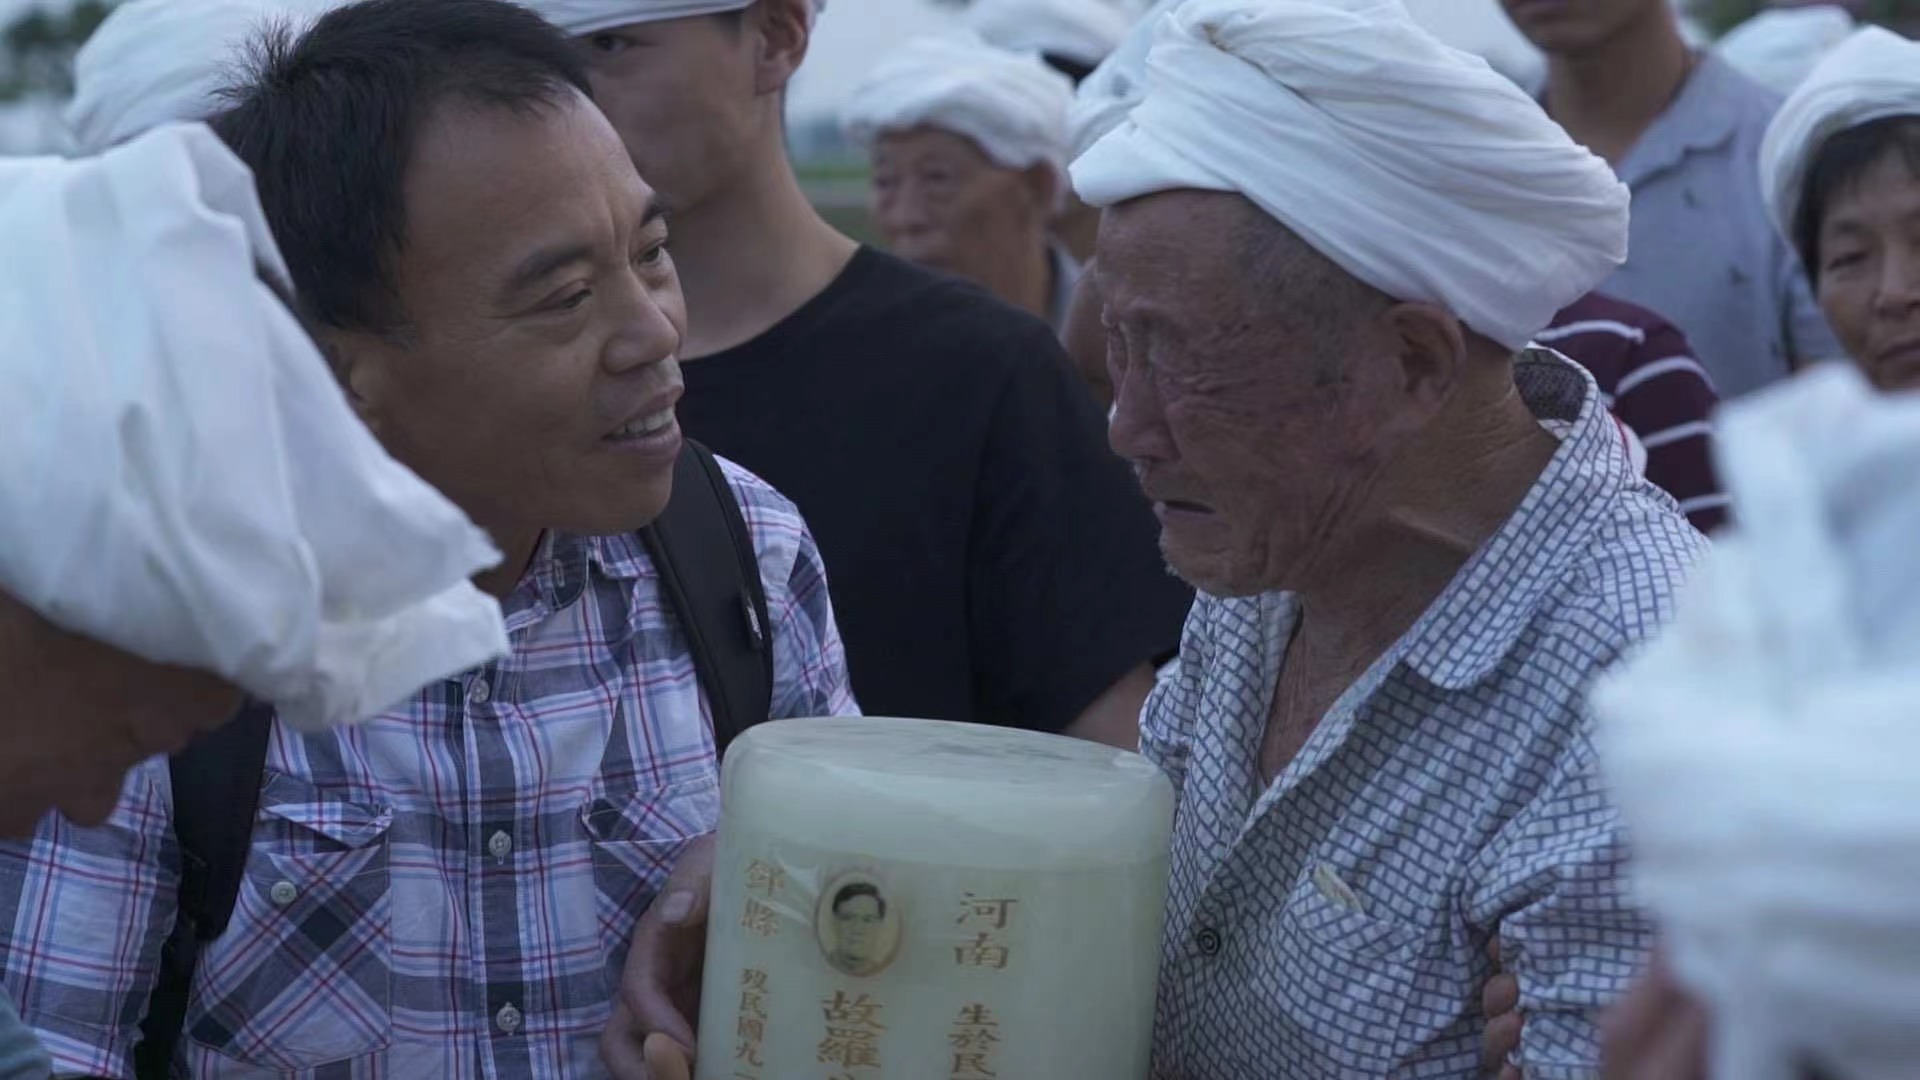 Over the past two decades, Liu had heard many elderly veterans in his neighborhood complain about being homesick. That's how the idea of helping them return home came into being. So far, Liu has carried the ashes of over 200 veterans back to their hometowns on the Chinese mainland for burial. Therefore, he's called 